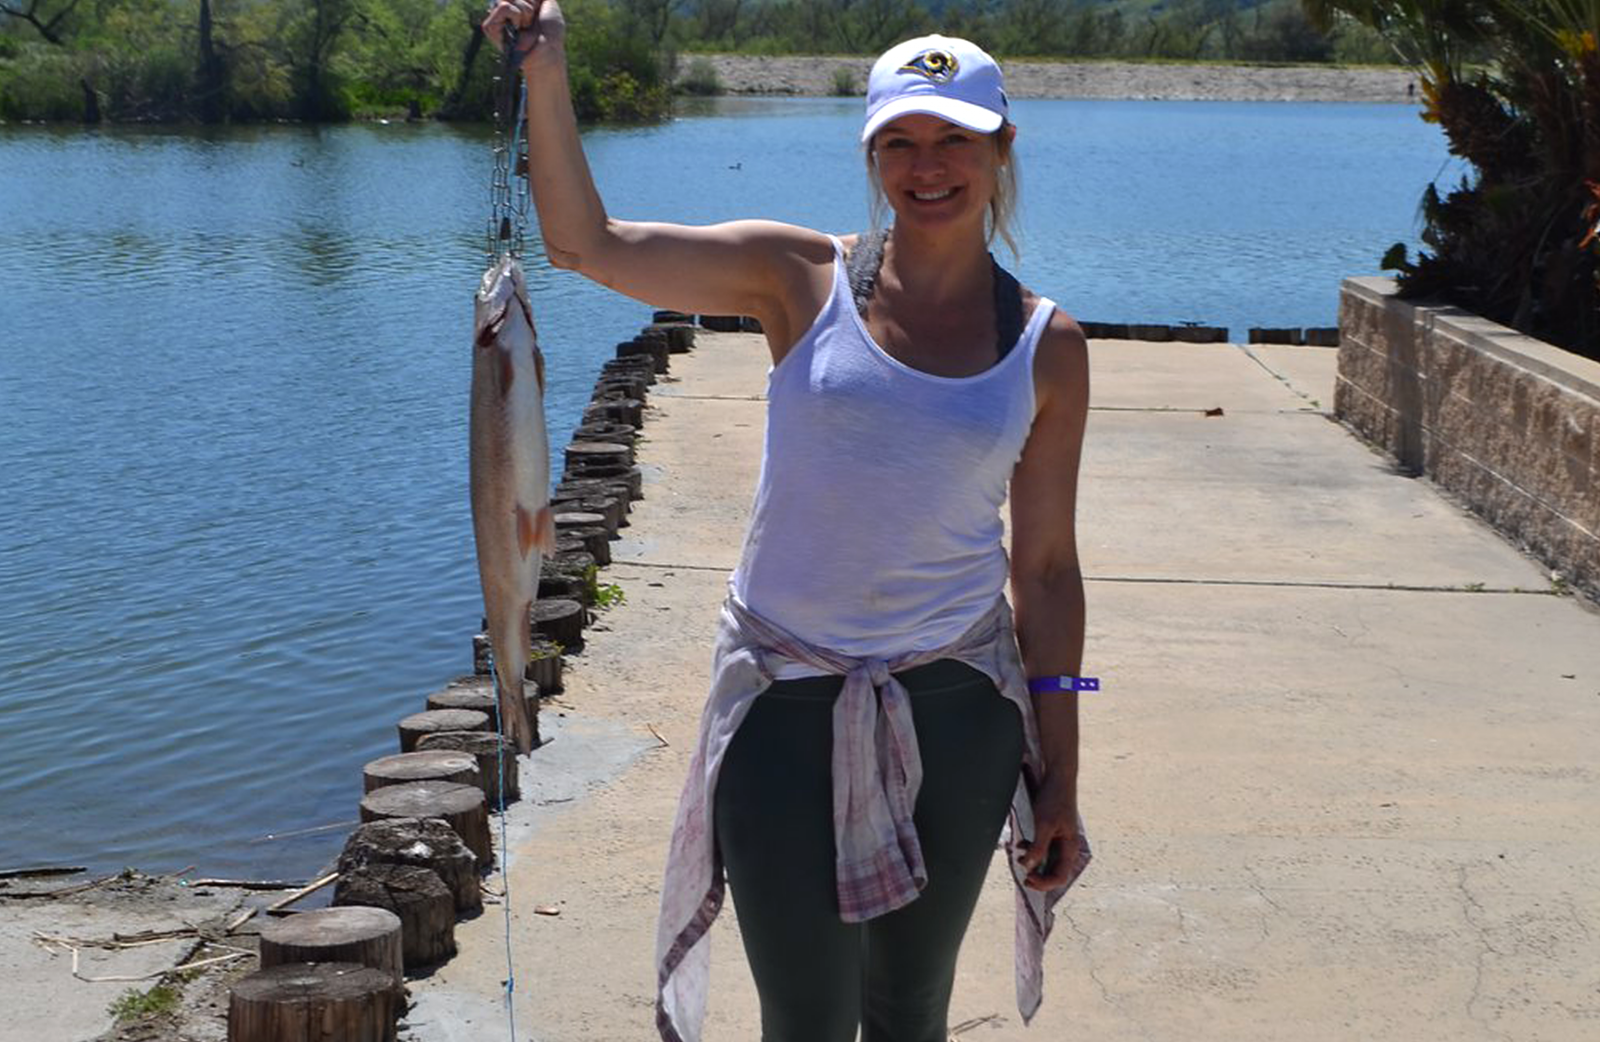 A woman holds up a bass fish she caught at Prado park.